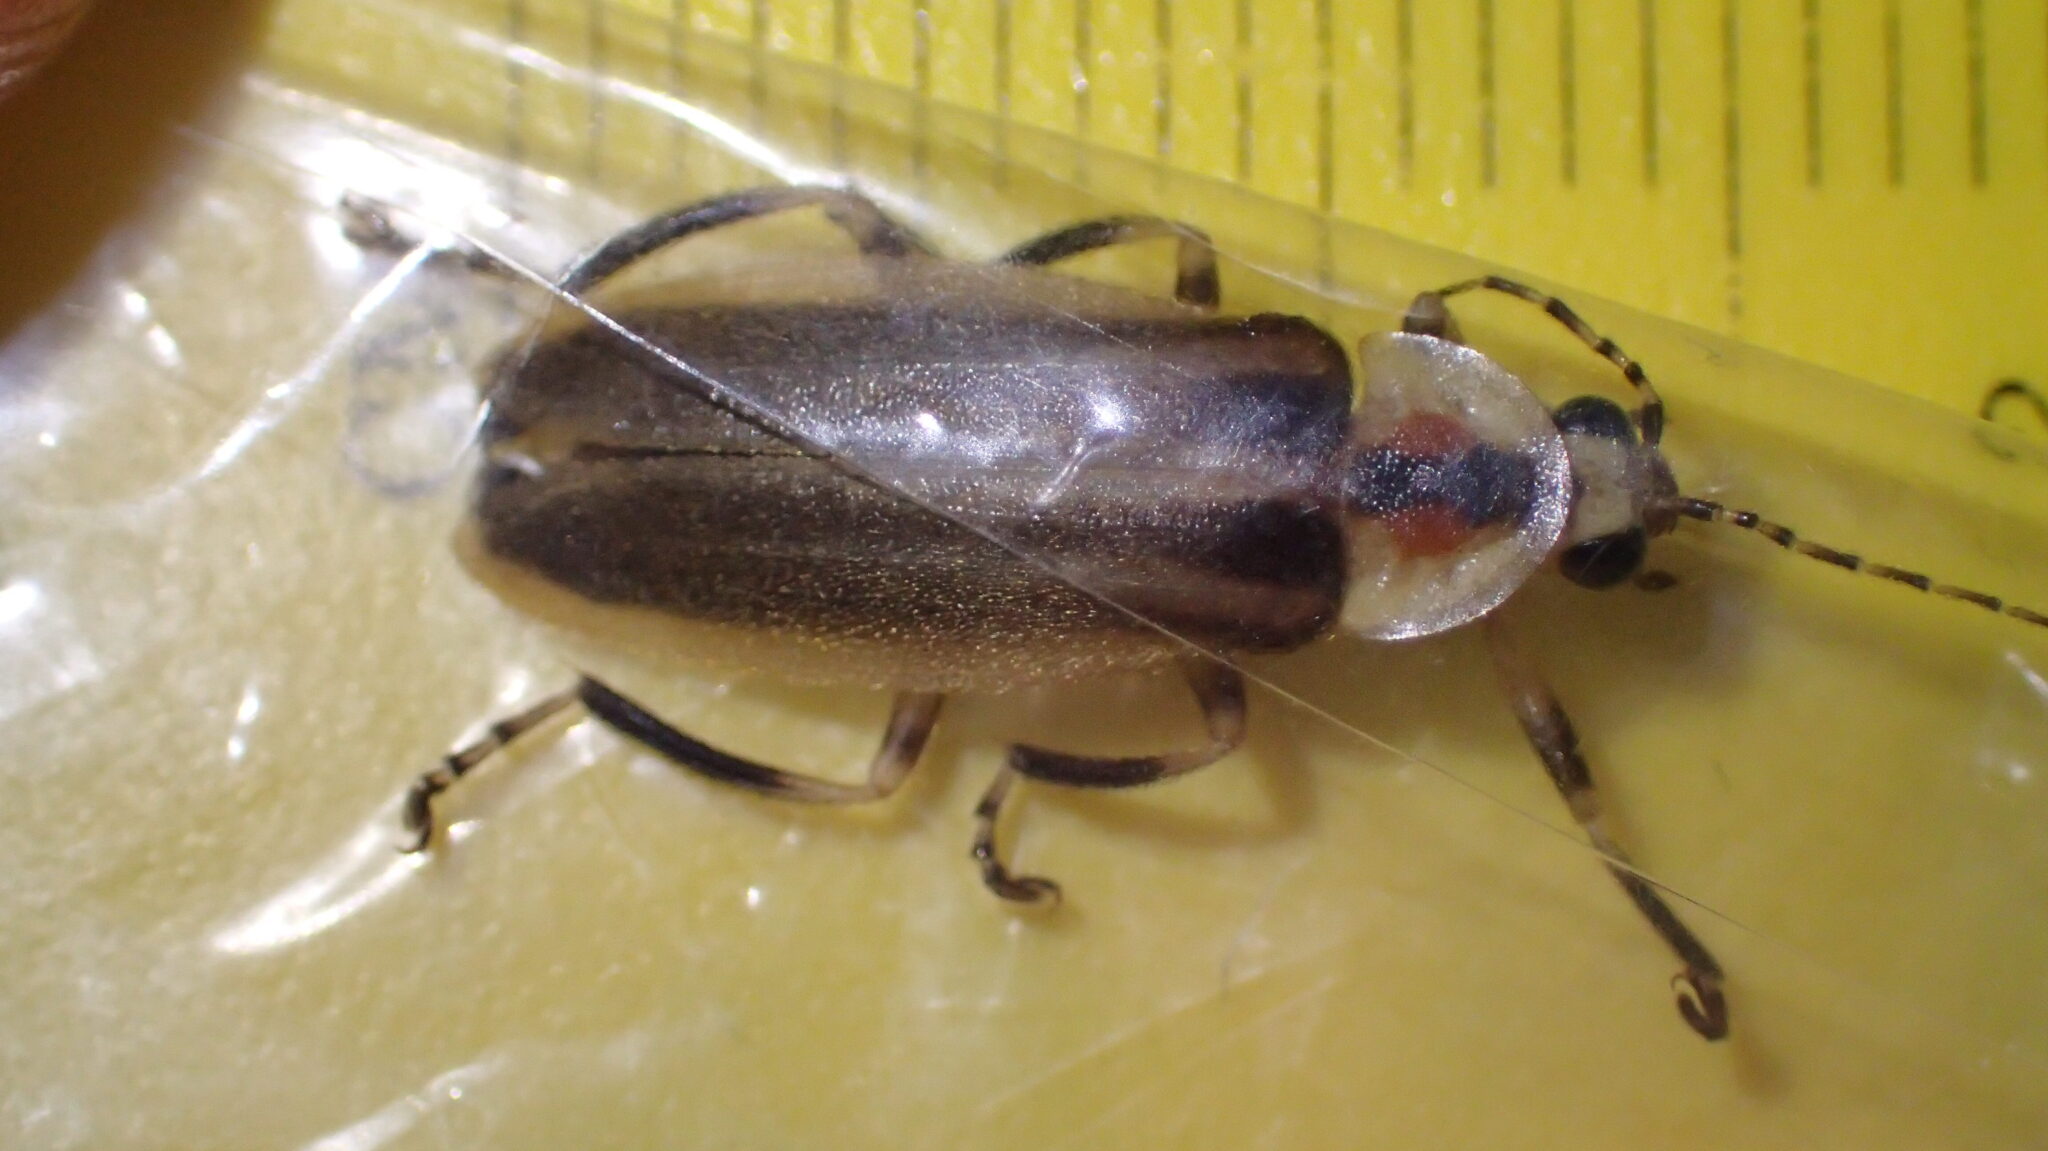 A firefly in a transparent plastic bag, pressed against a ruler.